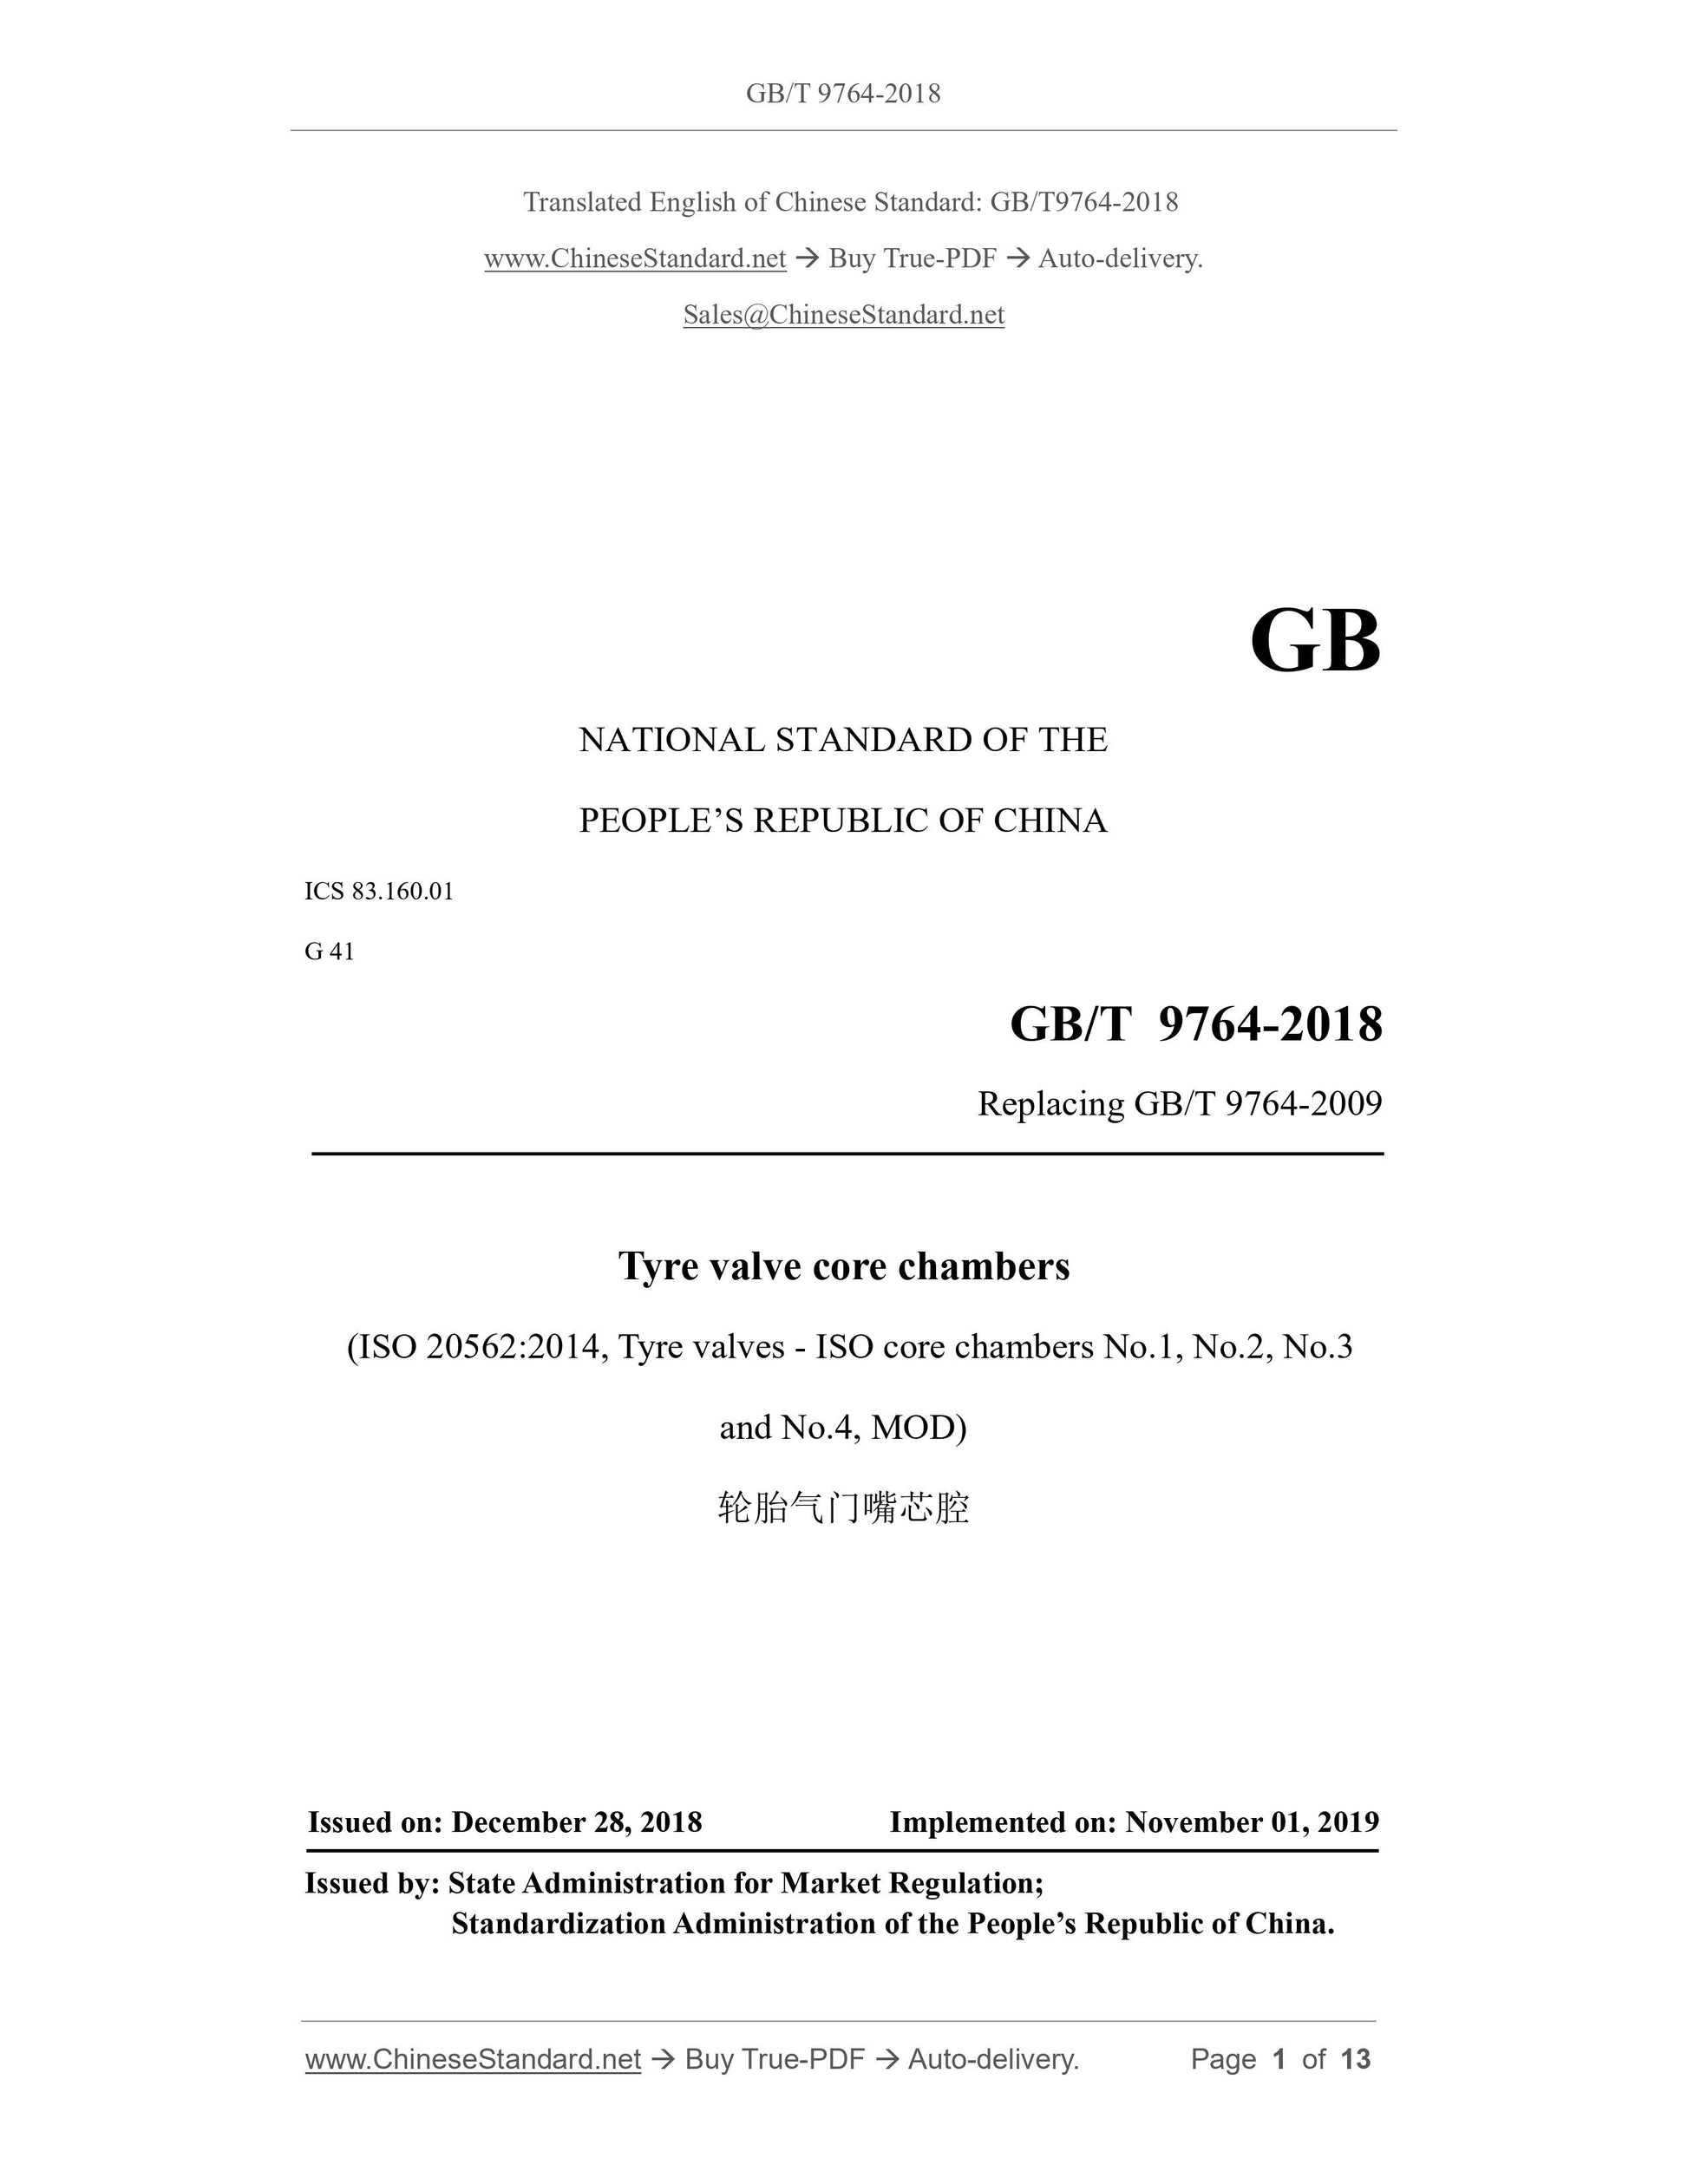 GB/T 9764-2018 Page 1